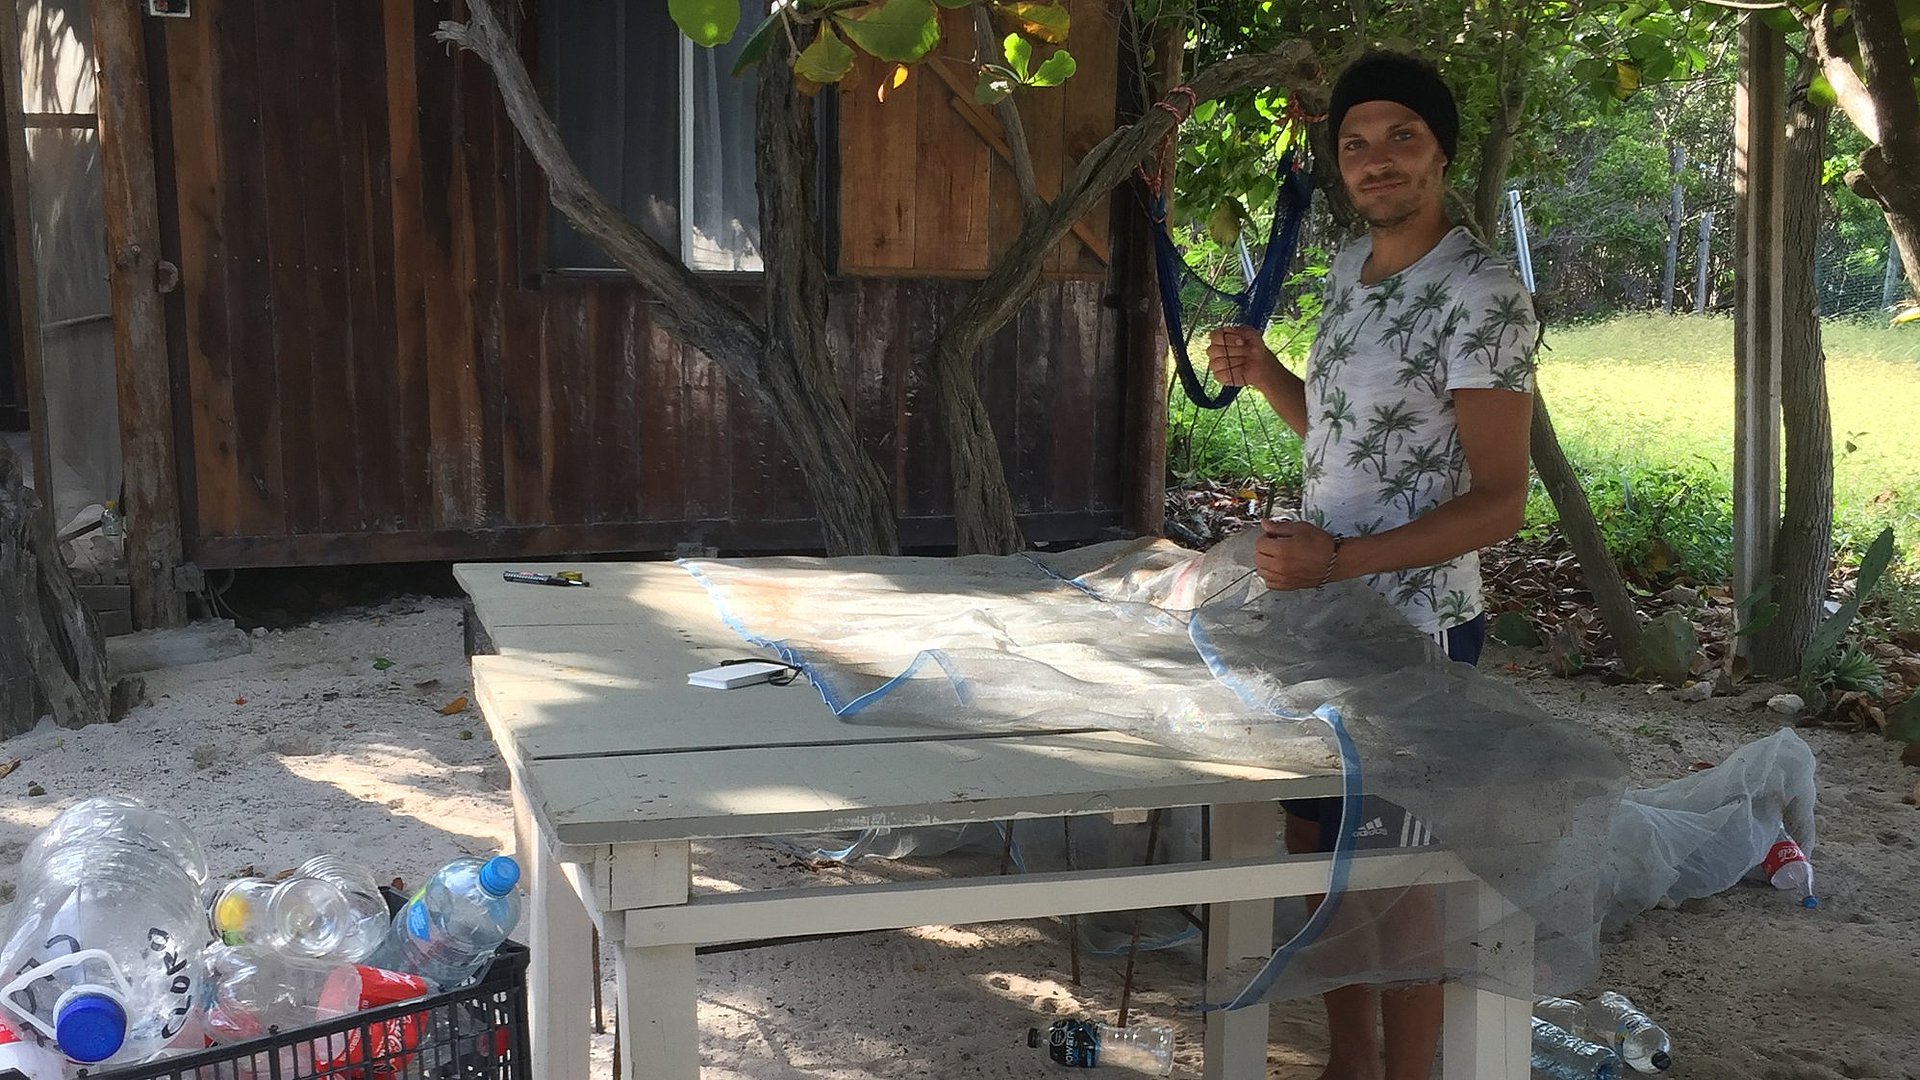 In the small Mexican town of Mahahual, Christopher Chavlina completed an internship at a "research centre".